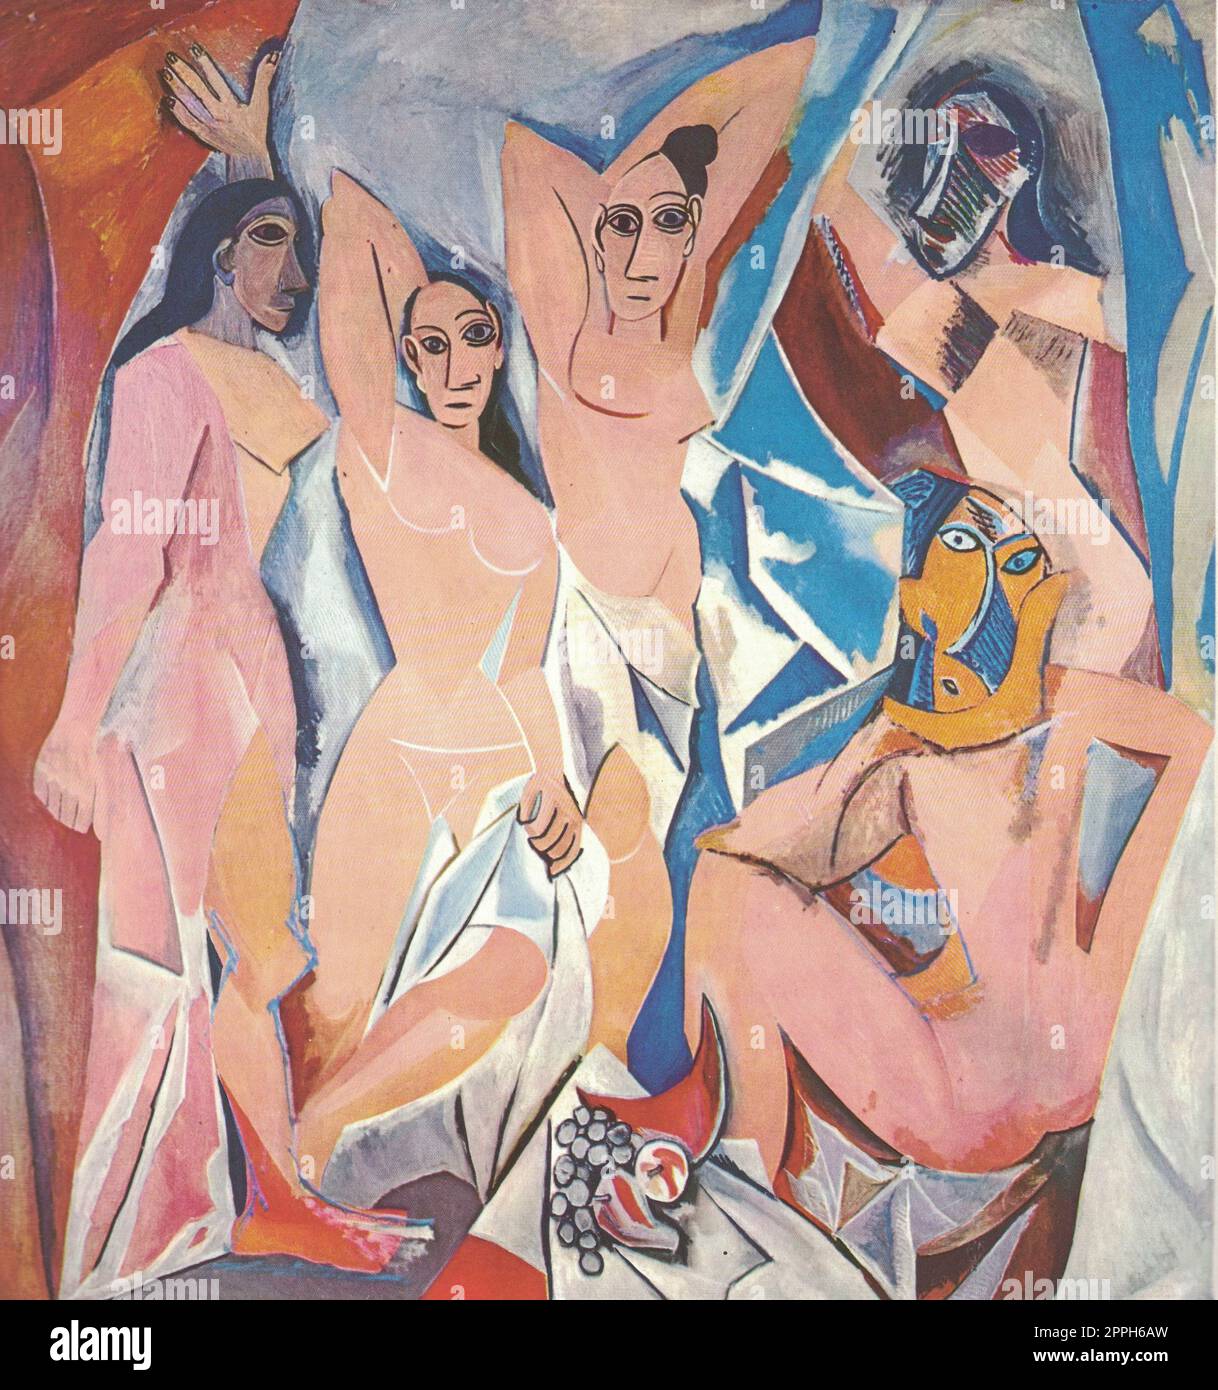 The Young Ladies of Avignon, 1907. Oil painting by Pablo Picasso. Pablo Ruiz Picasso, 25 October 1881 - 8 April 1973, was a Spanish painter, sculptor, printmaker, ceramicist and theatre designer who spent most of his adult life in France. Regarded as one Stock Photo